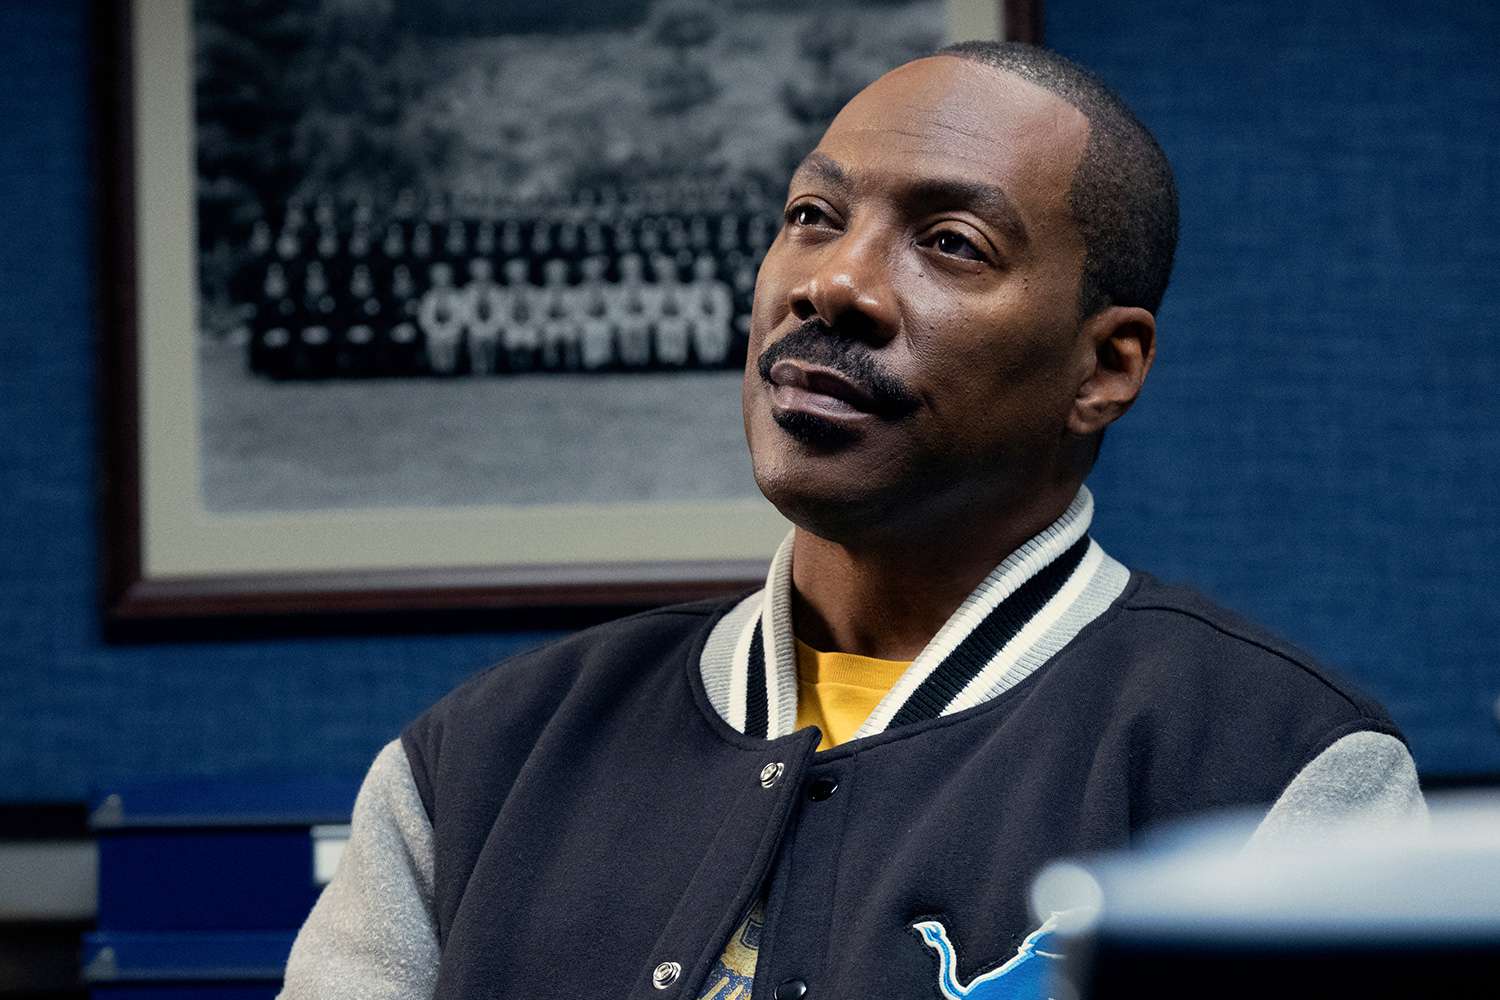 Eddie Murphy Opens Up About Making Latest 'Beverly Hills Cop' Sequel at 63: 'I Would Rather Not Do Any Stunts'